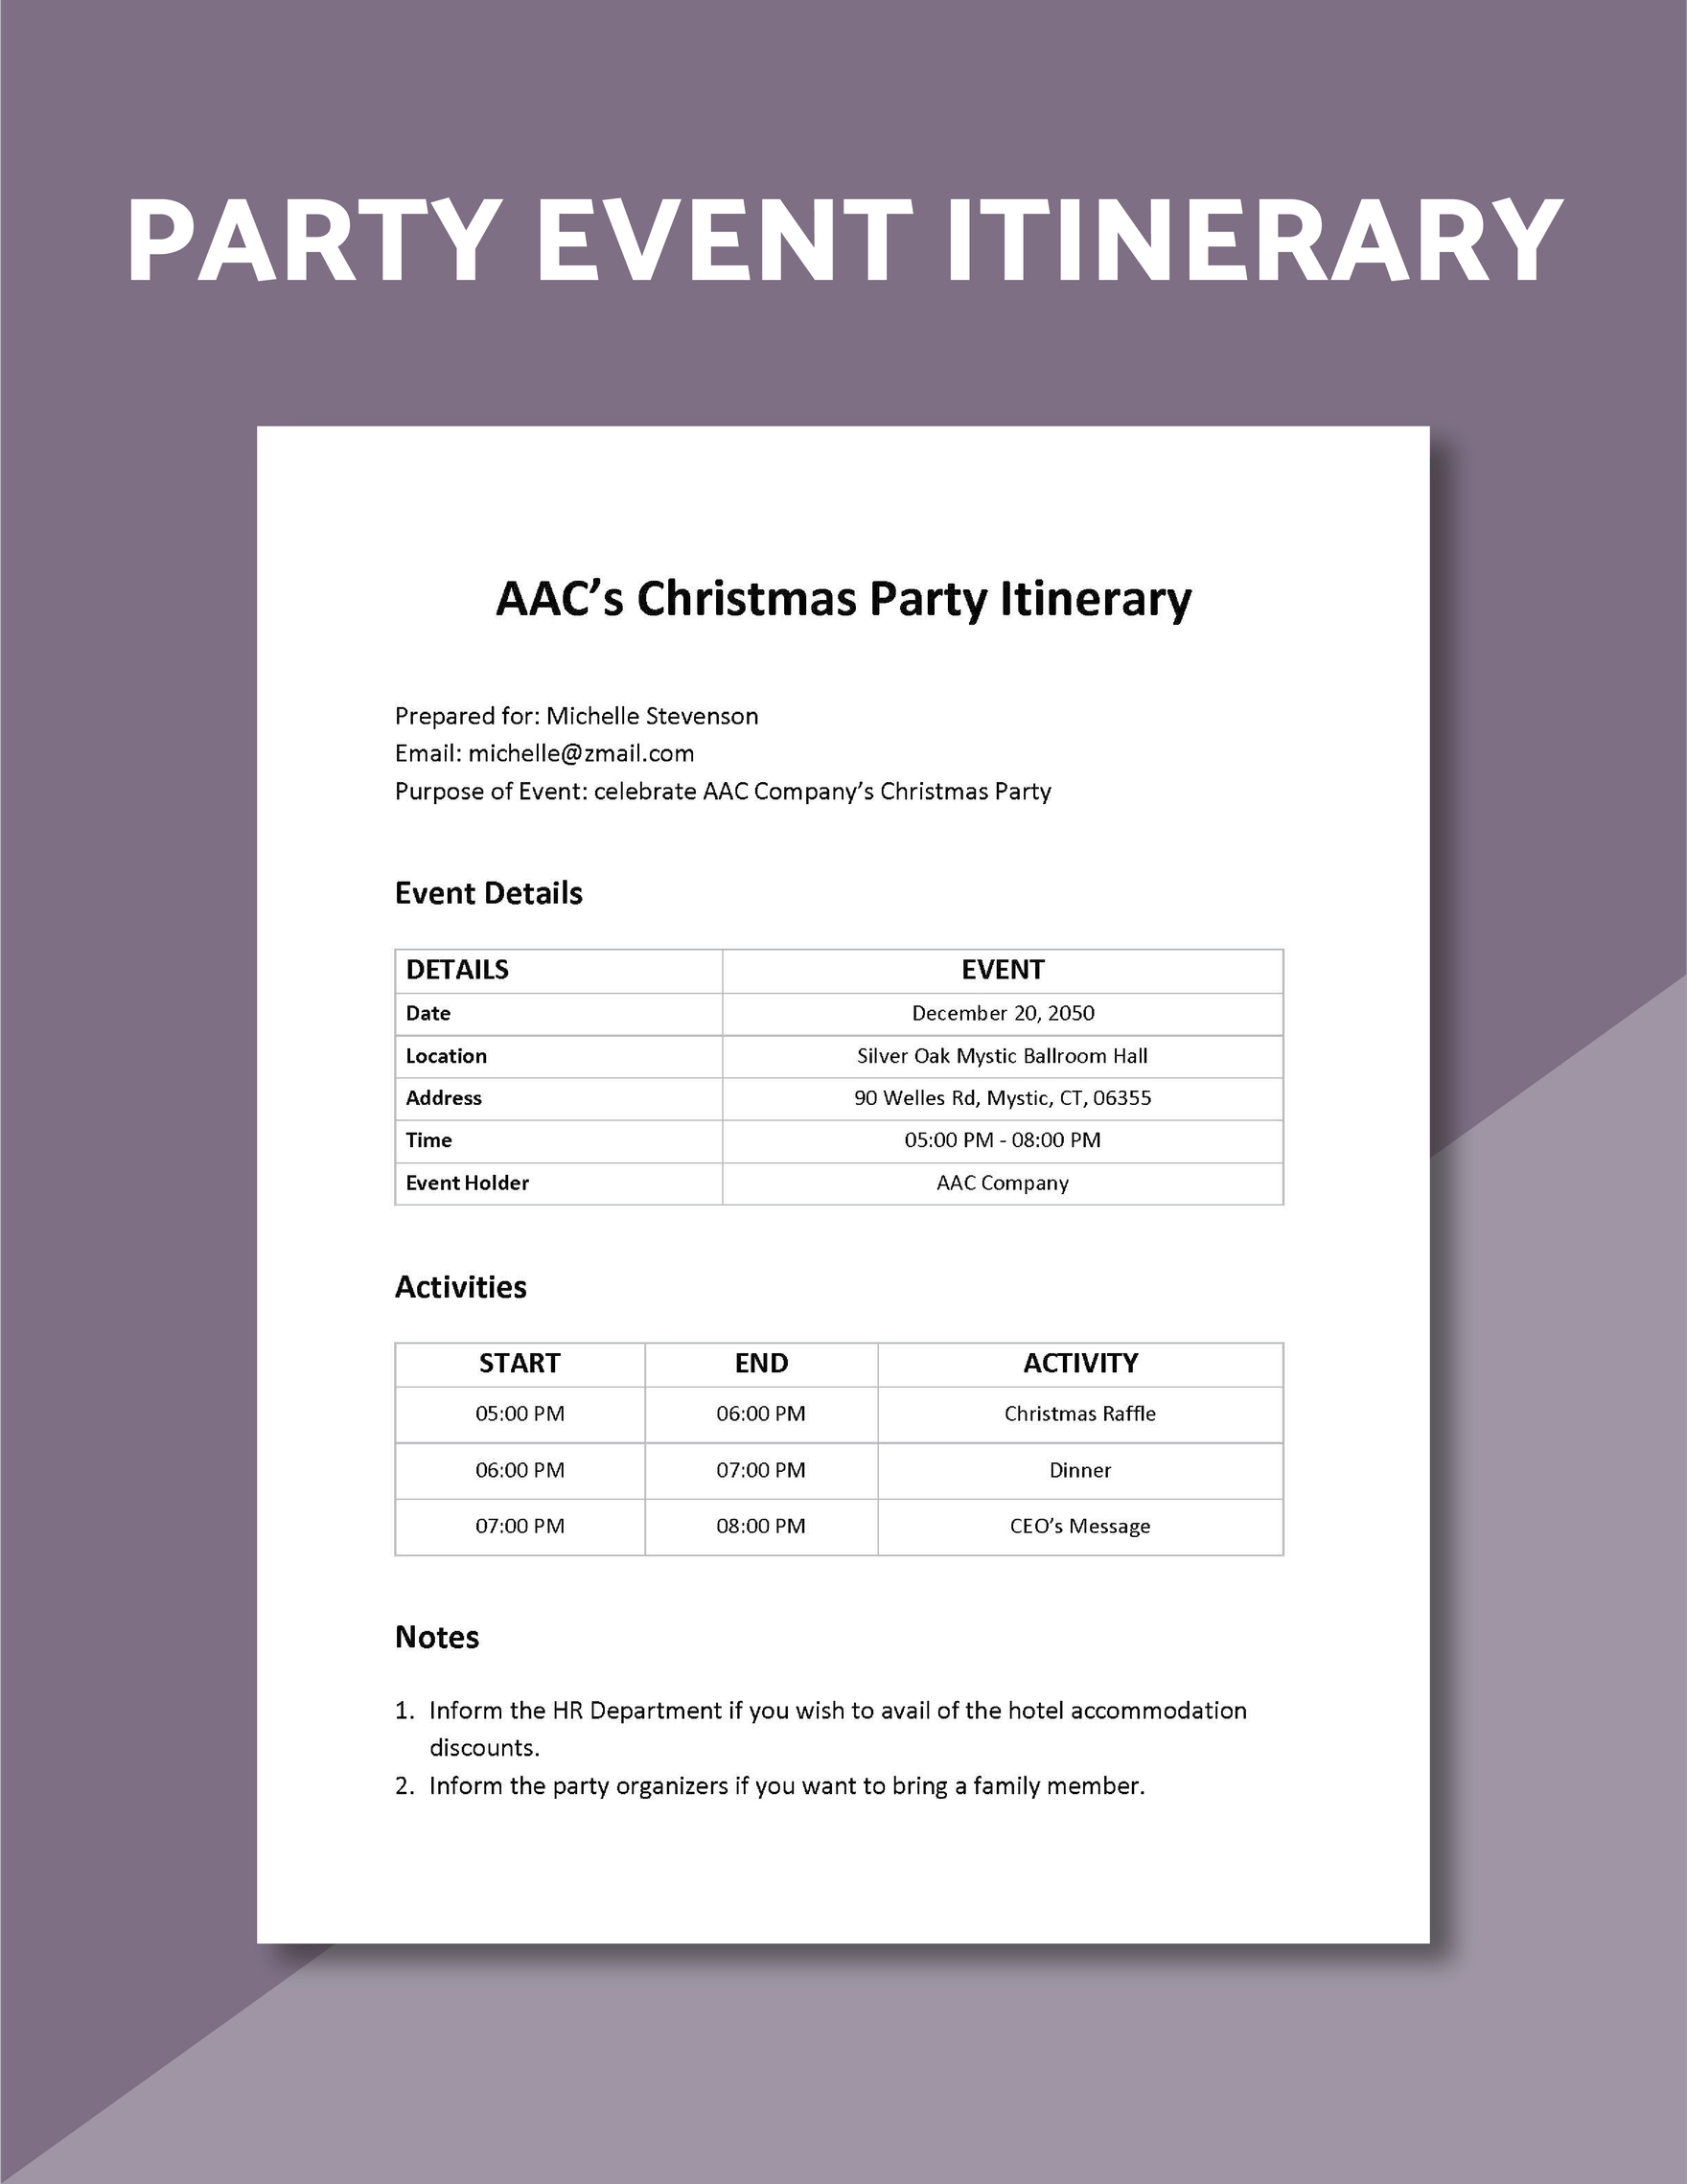 Party Event Itinerary Template